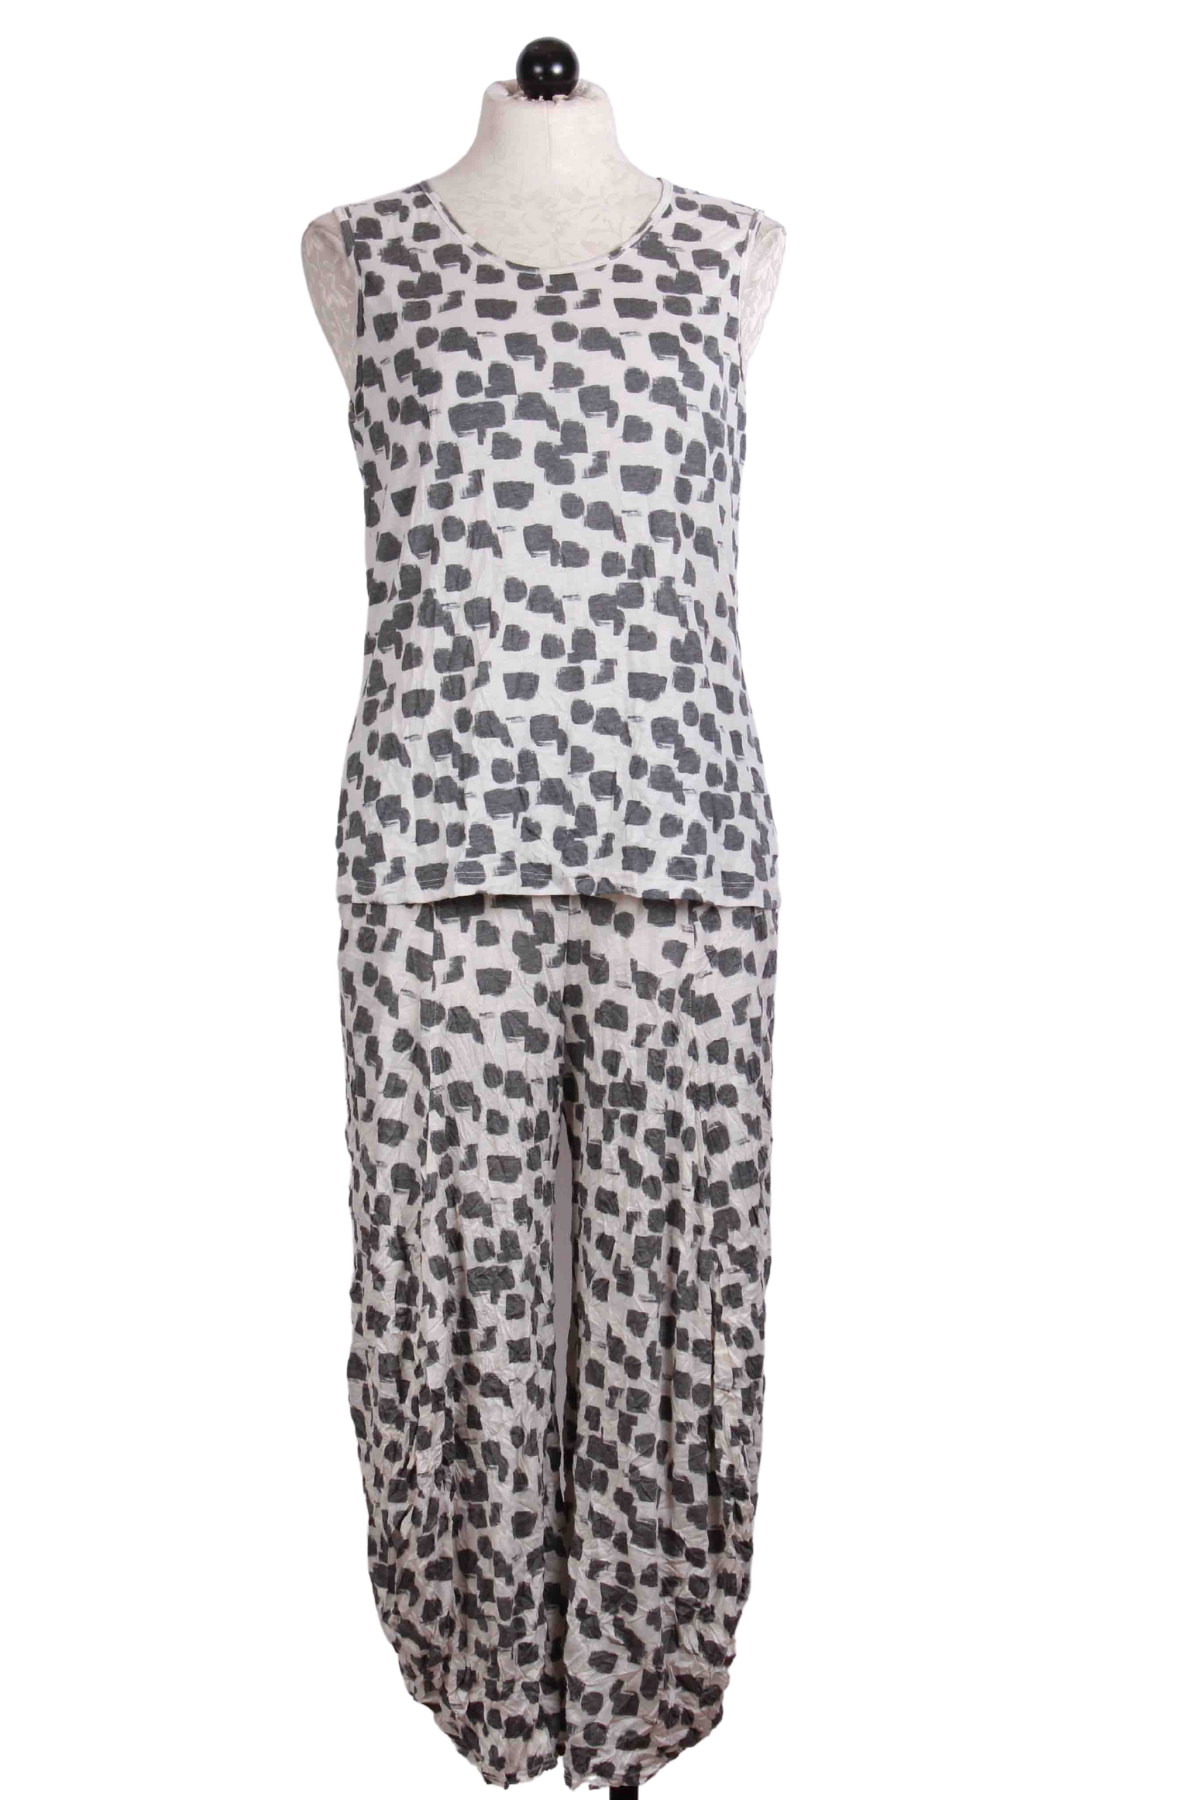 Square Dot Crinkle Tank by Reina Lee with matching Square Dot Crinkle Pant 